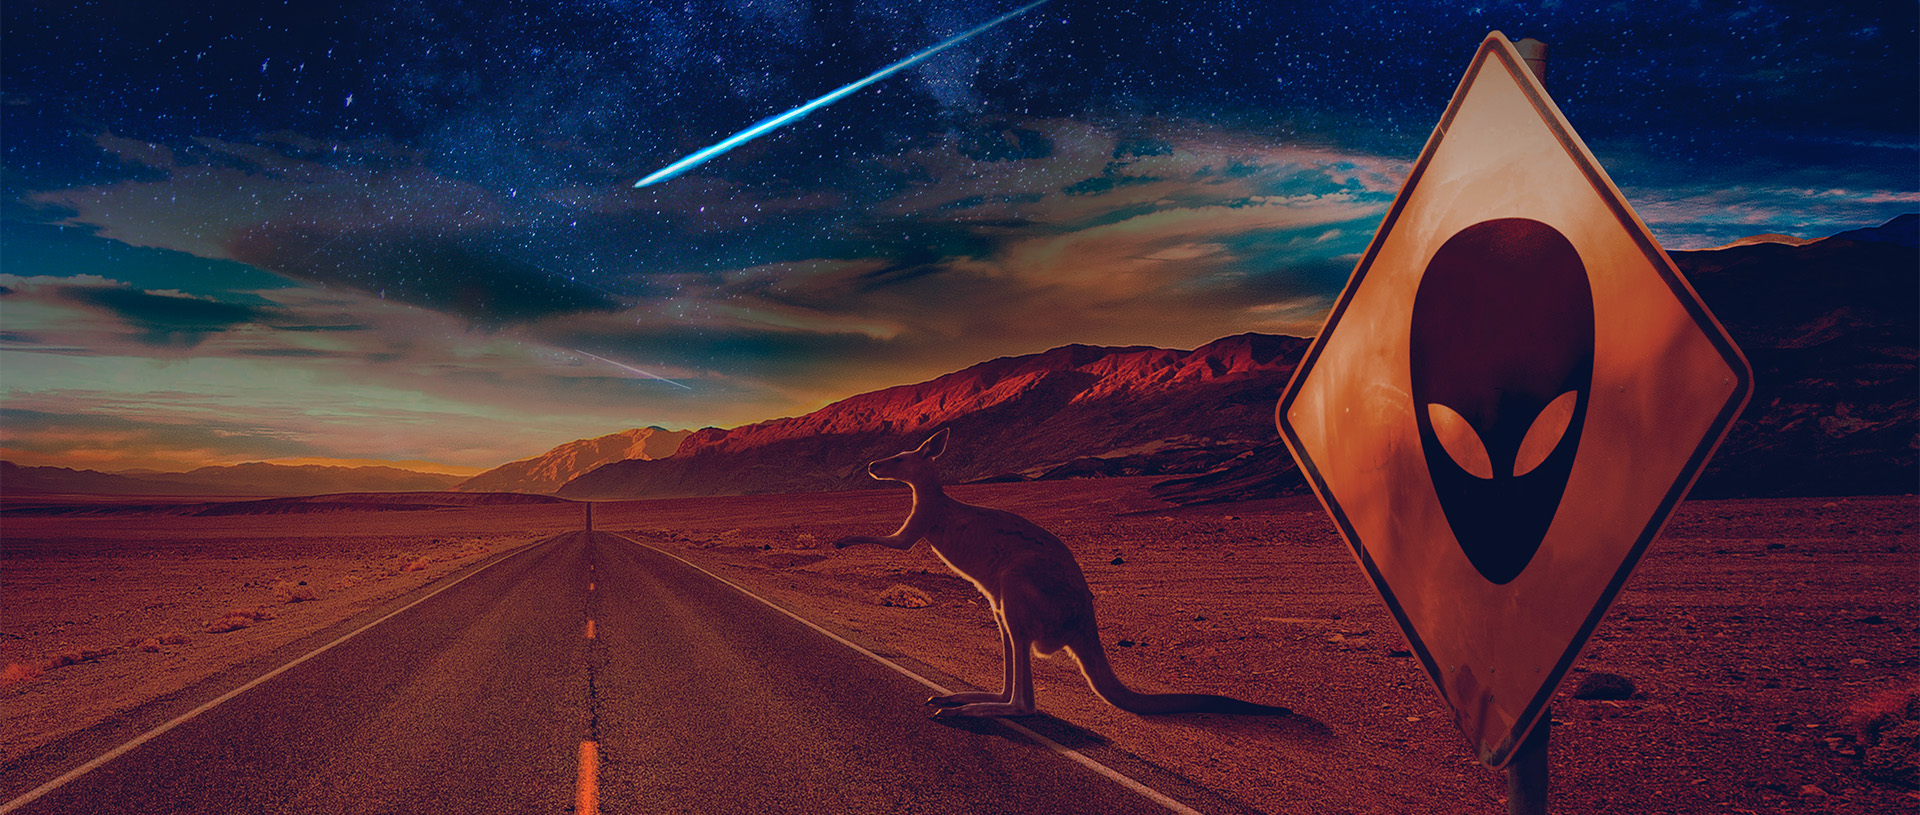 Close Encounters Down Under - banner image - 1920x815